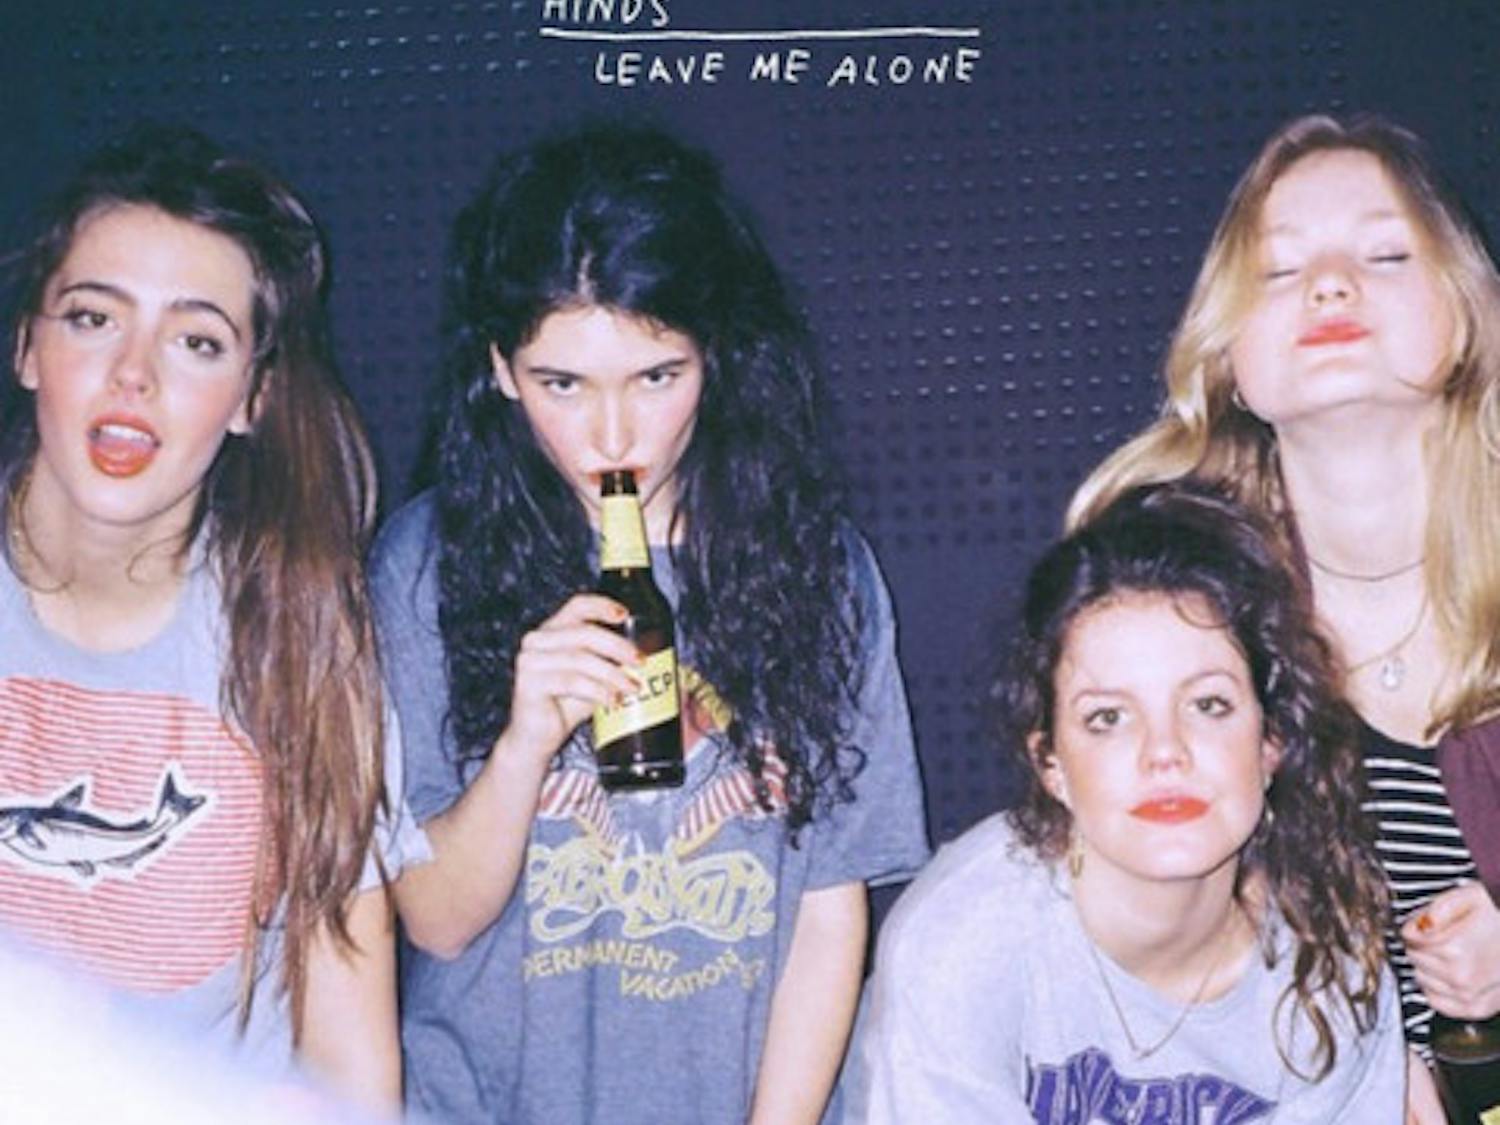 Hinds-2016-Leave_Me_Alone_med-res_large